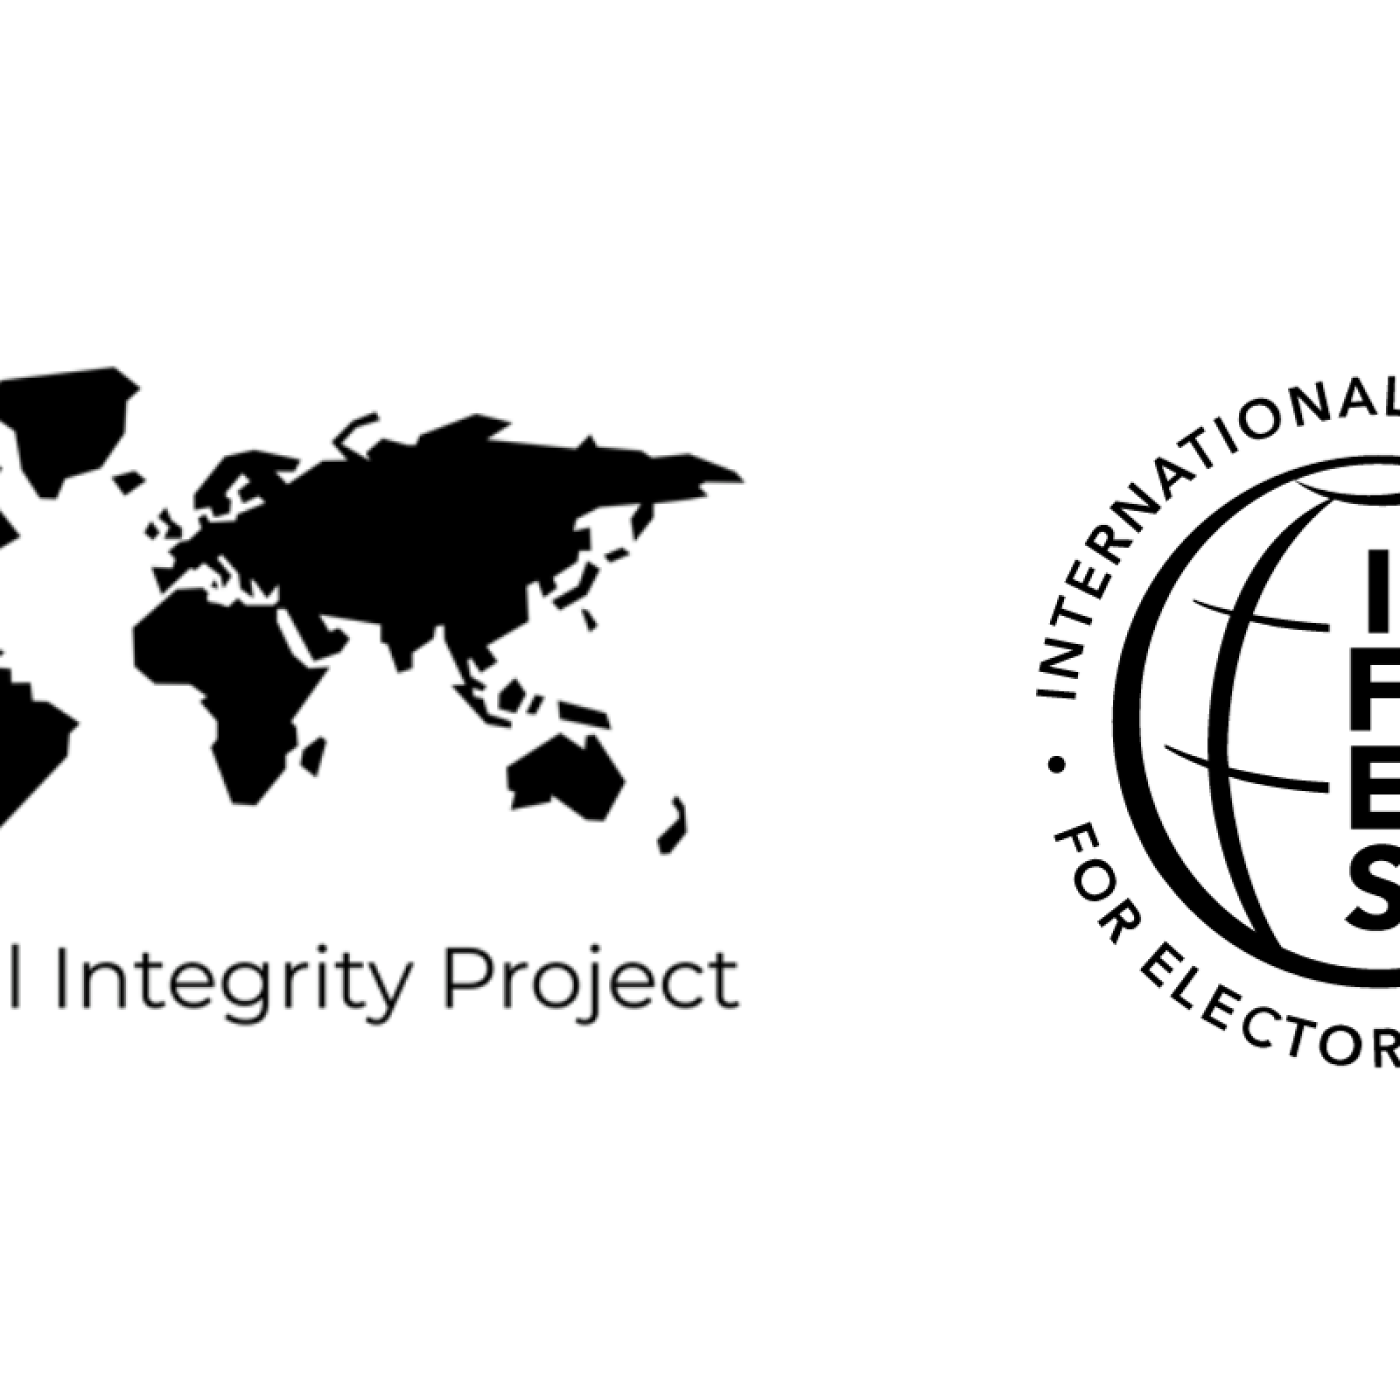 electoral integrity project logo ifes logo